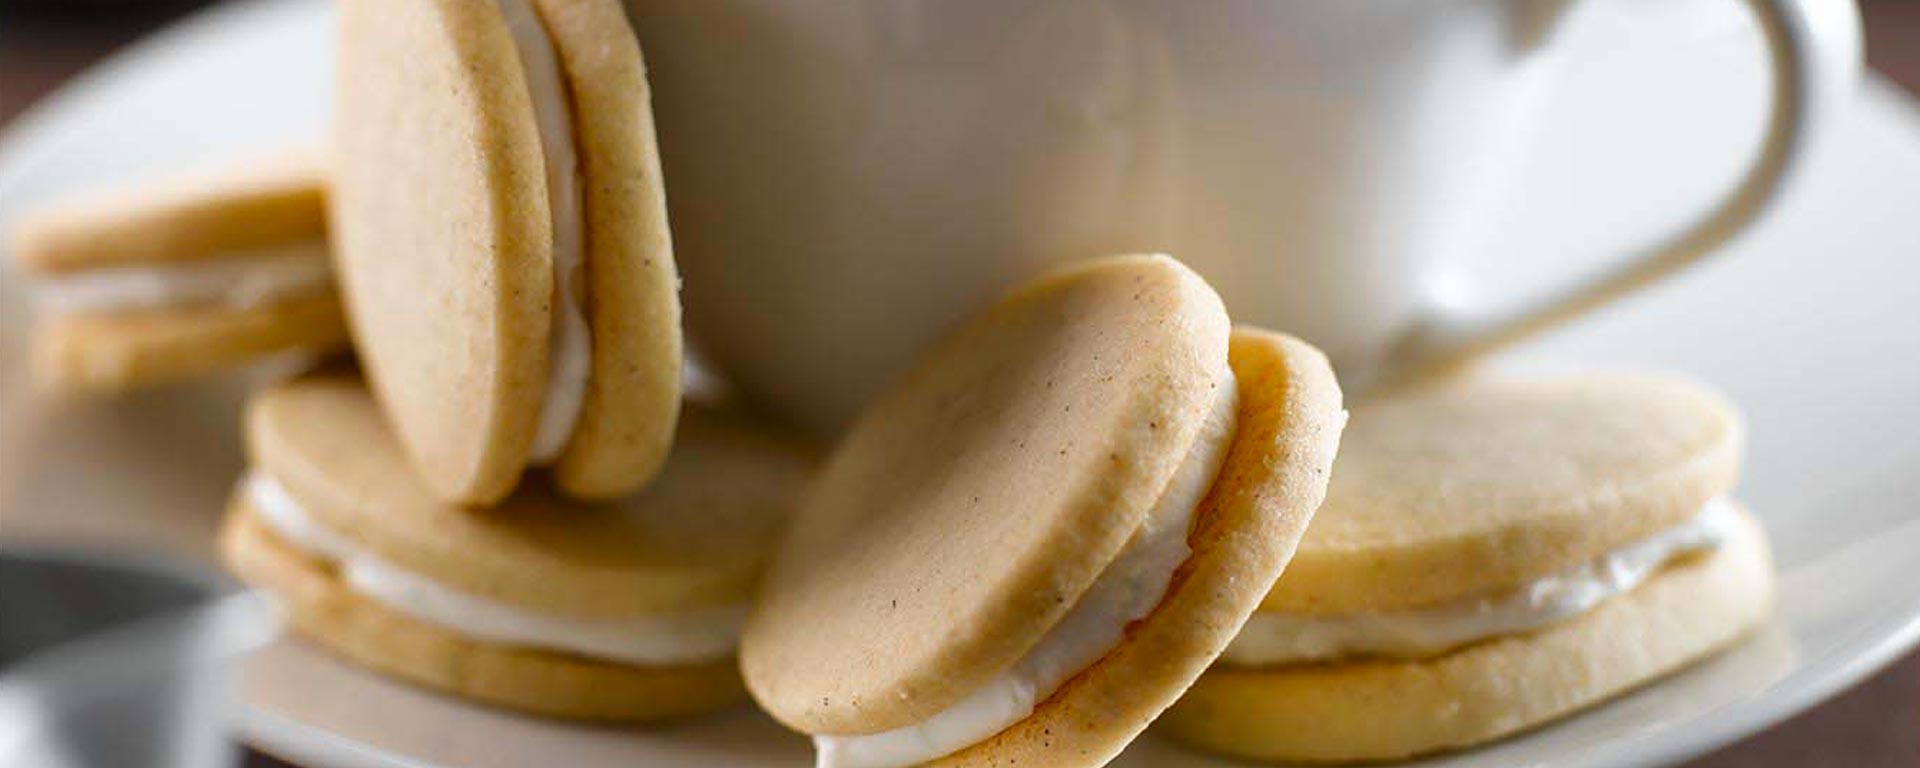 Photo of - Cardamom and Lime Sandwich Cookies with Chai Floating Islands